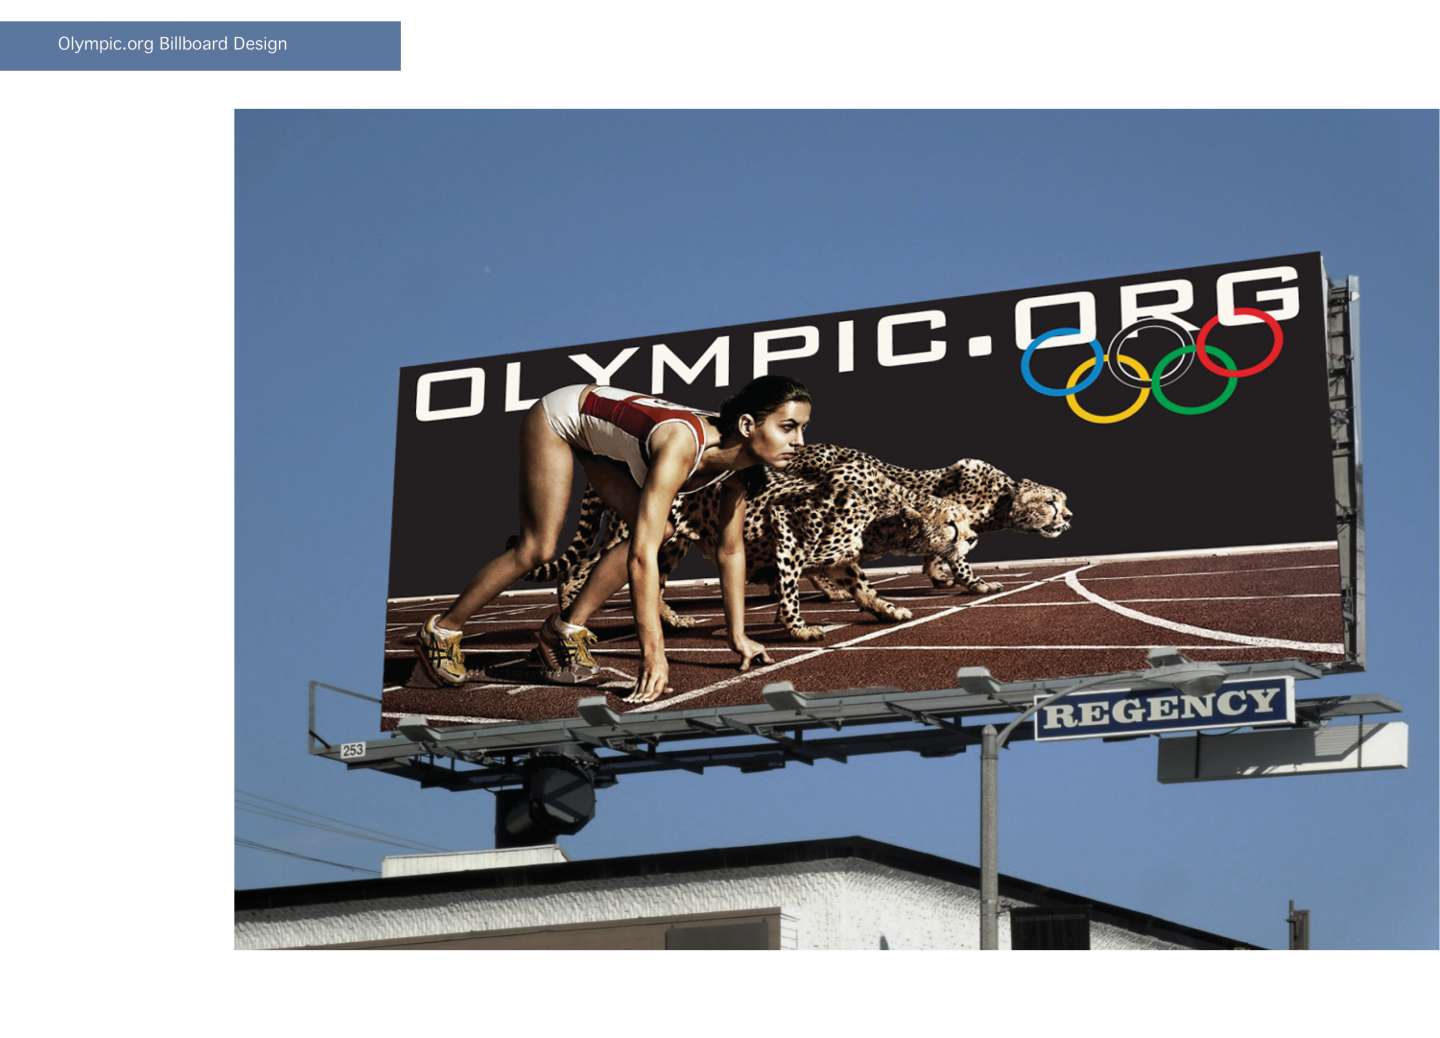 Olympic.org